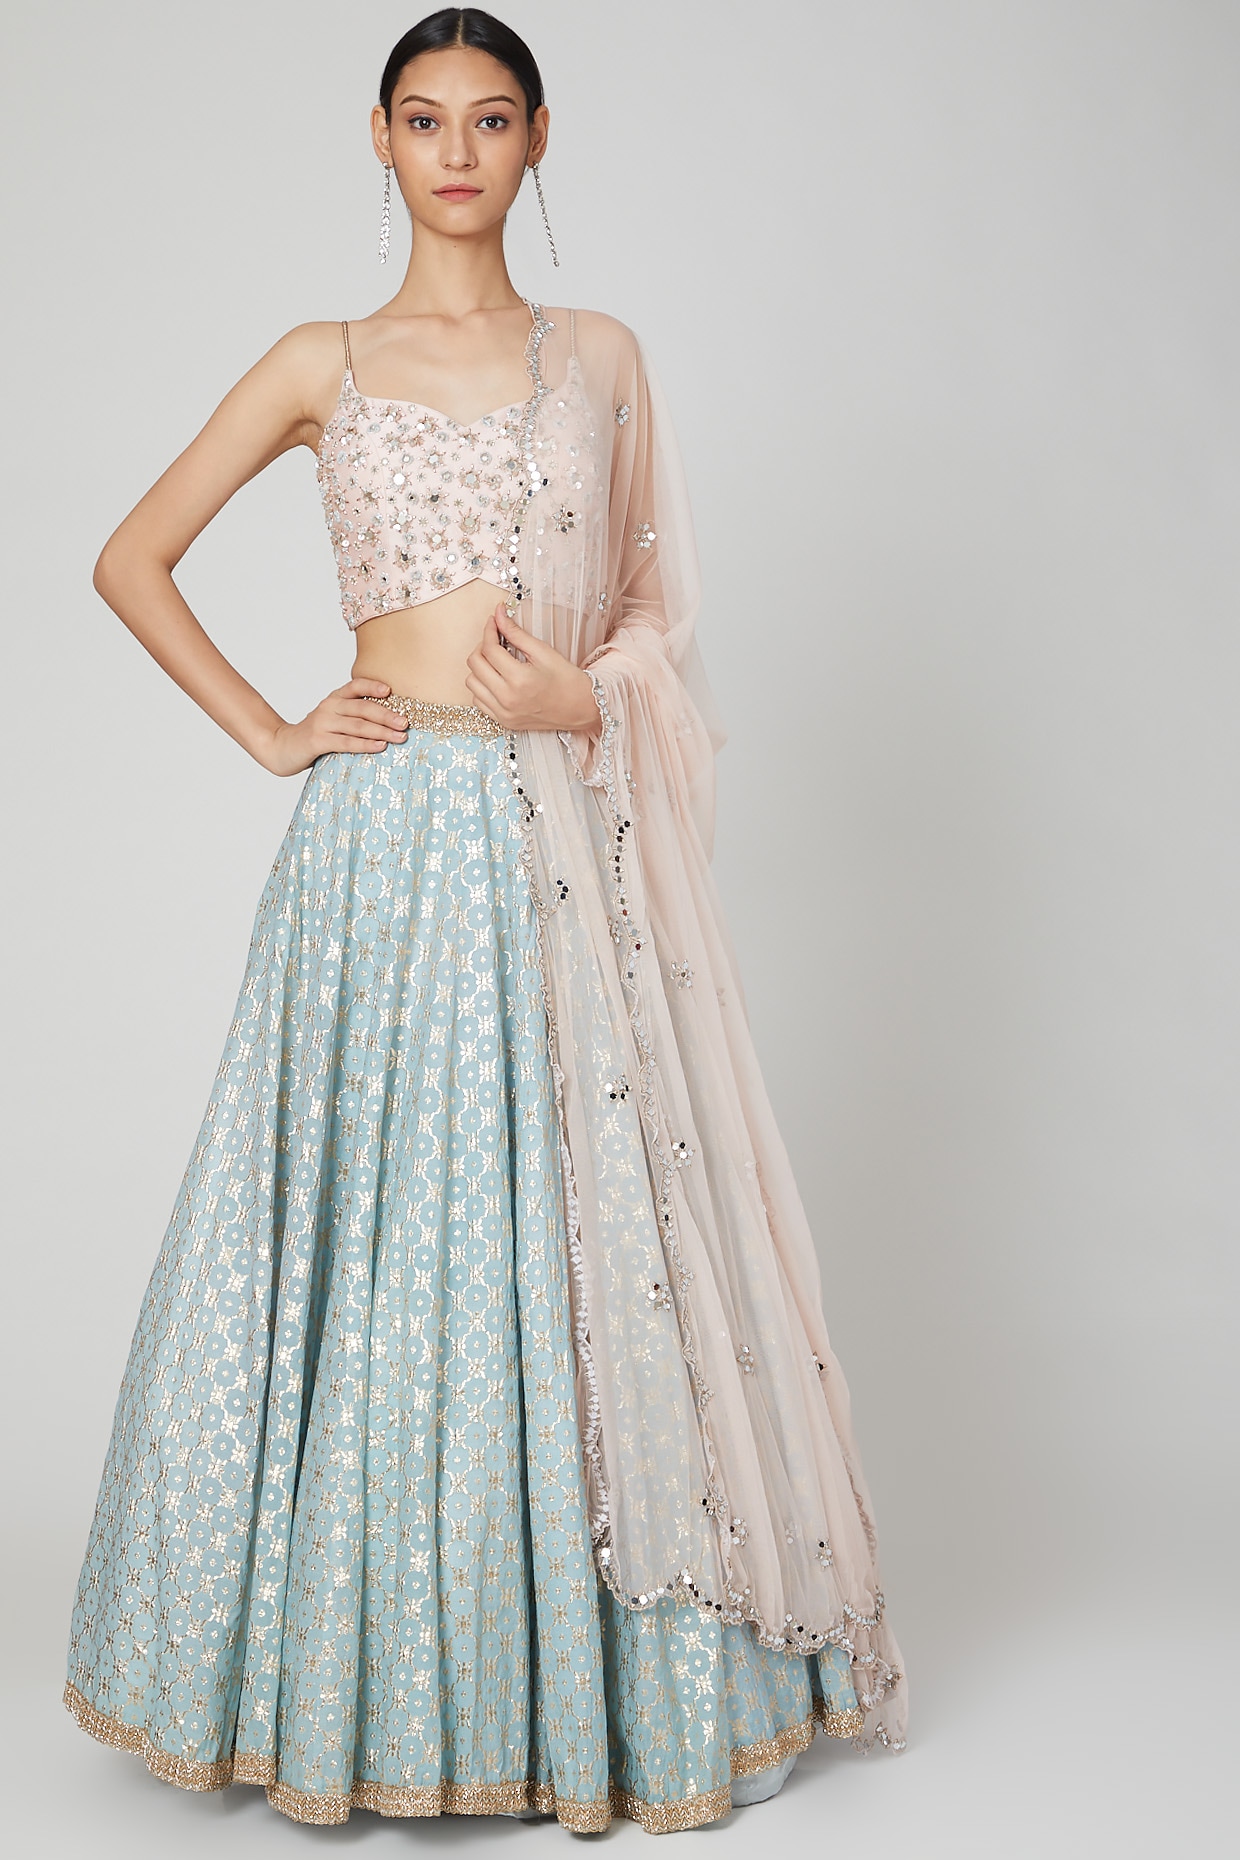 Photo of Light pink and blue floral embroidery lehenga